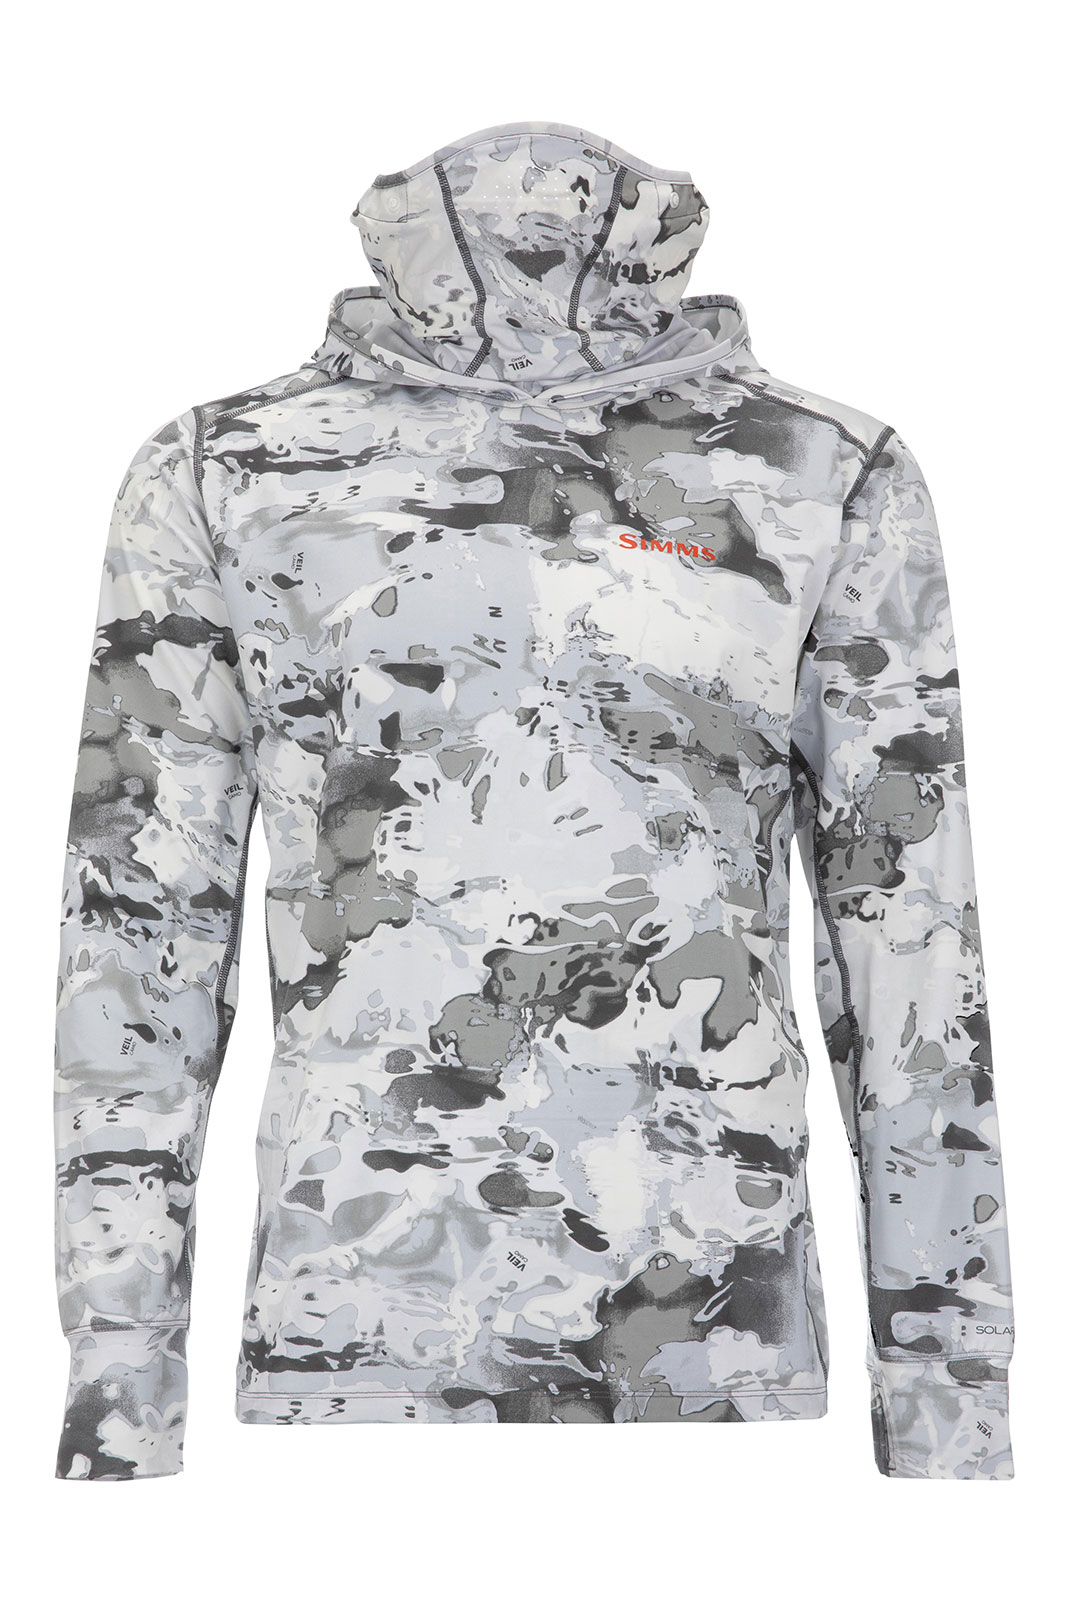 Simms Solarflex Guide Hoodie at ICAST 2022